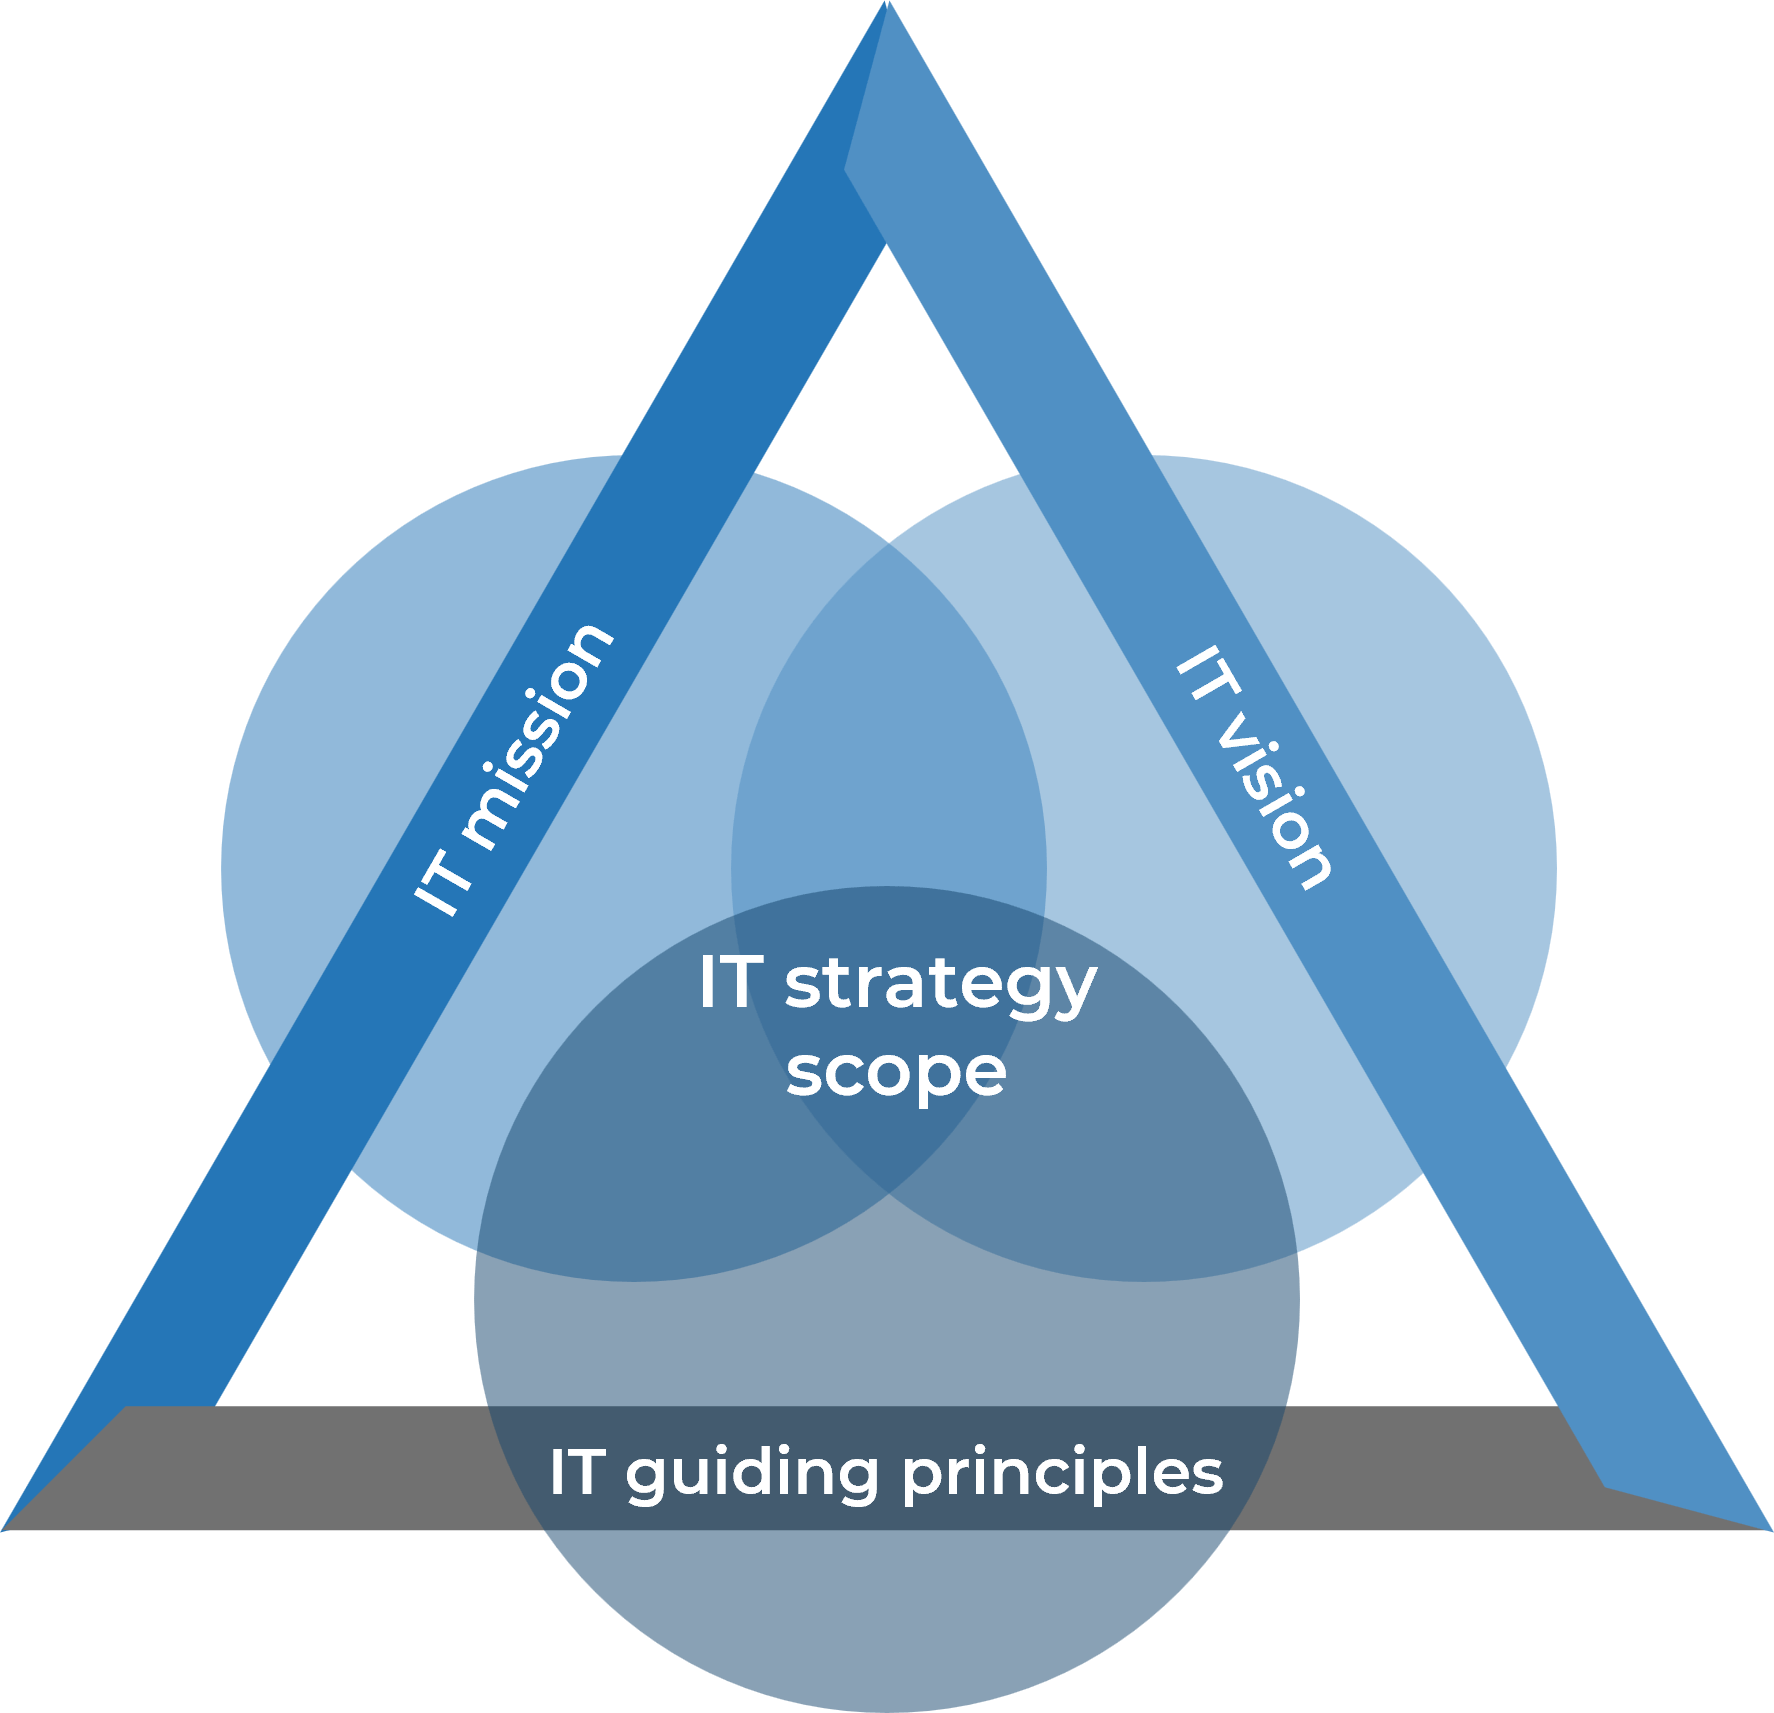 an image showing the IT Strategy Scope.